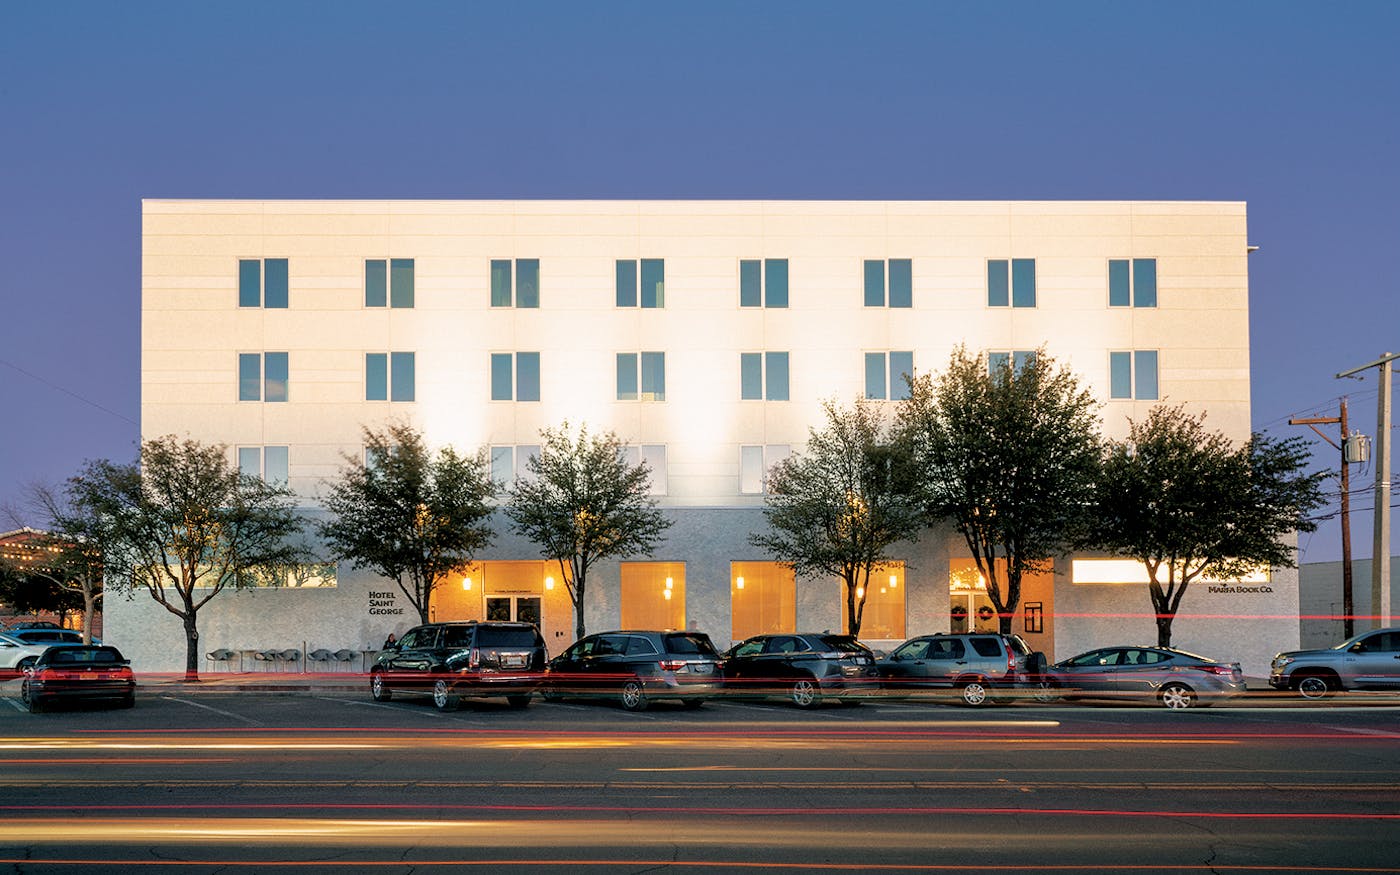 https://img.texasmonthly.com/2020/01/Small-Towns-Big-Money-Marfa-Hotel-Saint-George-exterior-feat.jpg?auto=compress&crop=faces&fit=crop&fm=jpg&h=1050&ixlib=php-3.3.1&q=45&w=1400